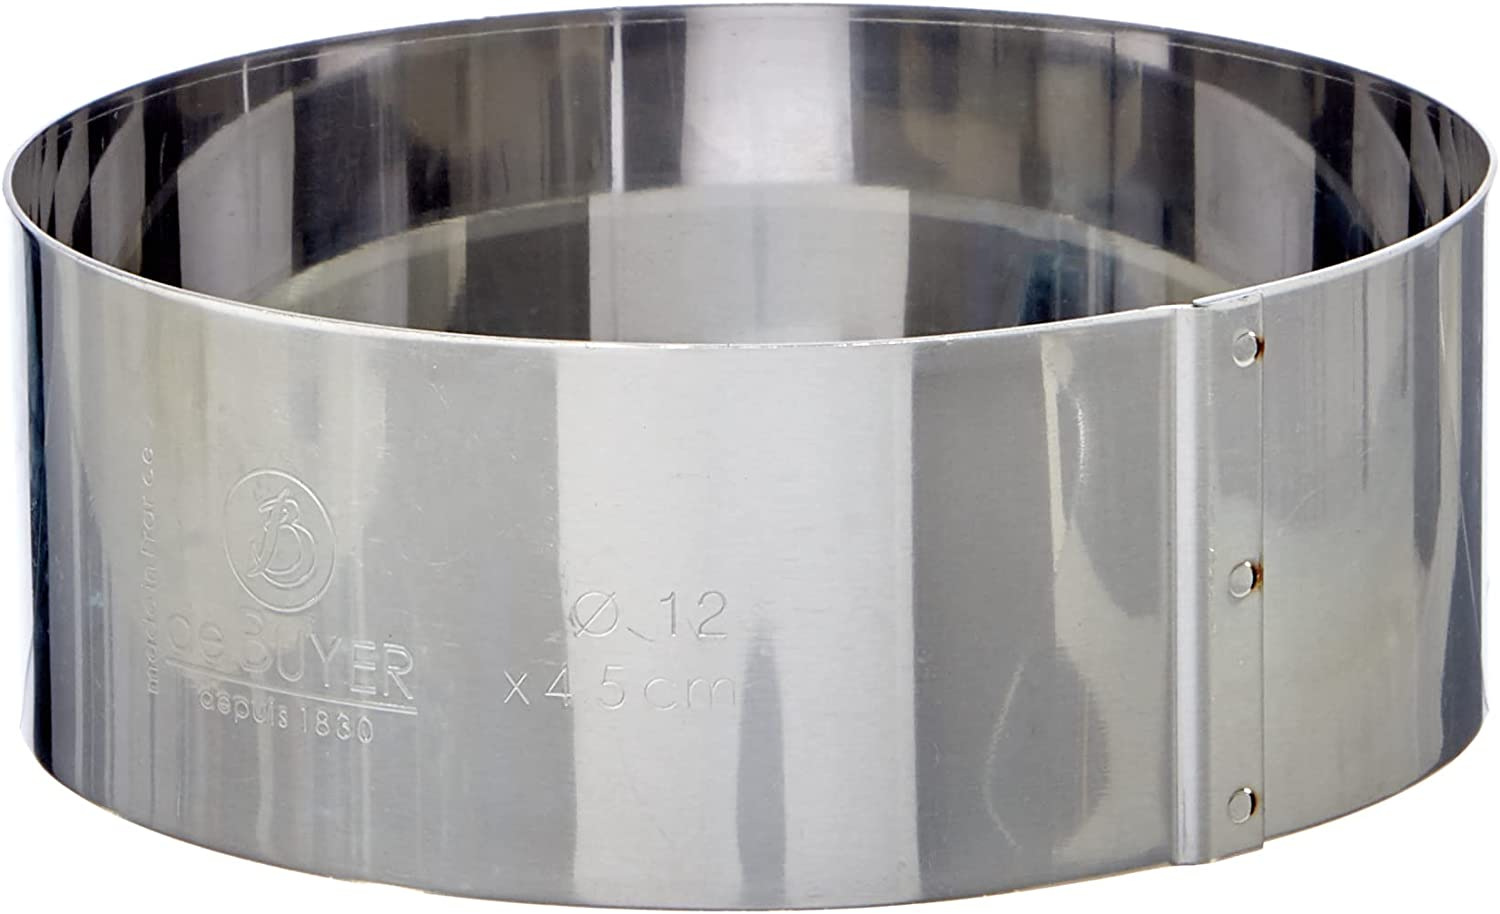 Cake ring made of stainless steel - INOX RVS FOR FOOD INDUSTRY